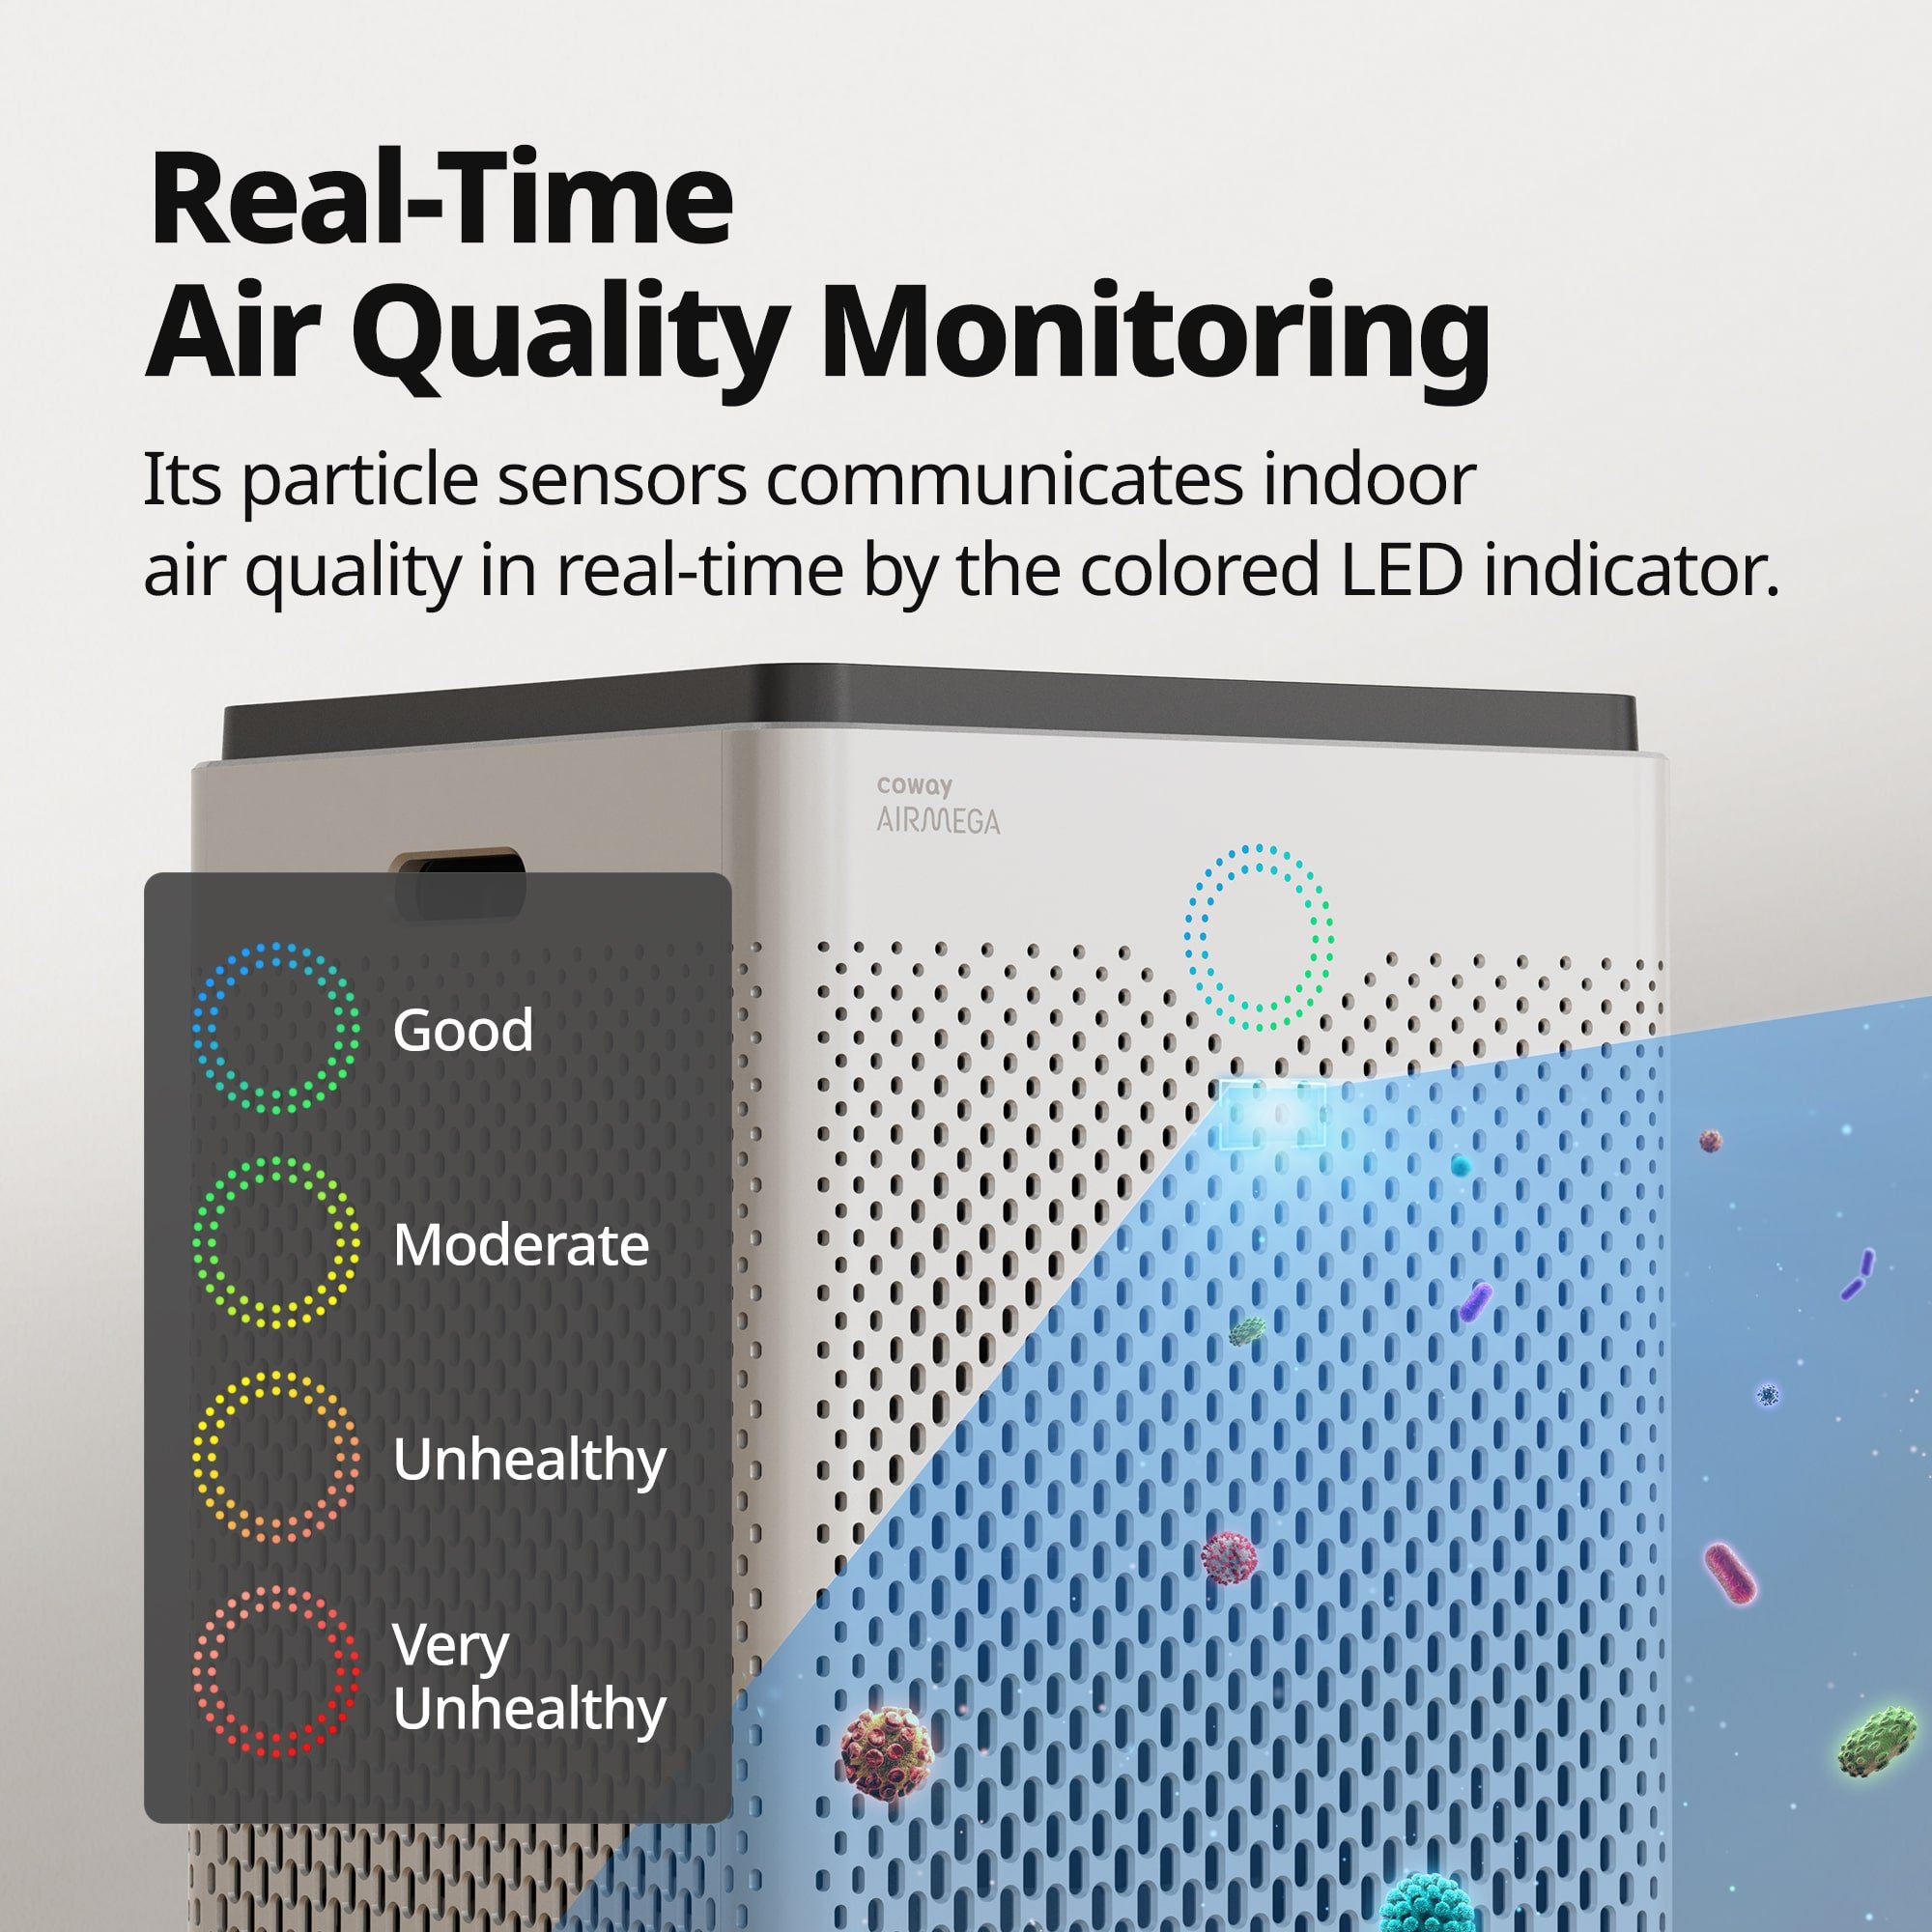 Real-Time Airquality Monitoring